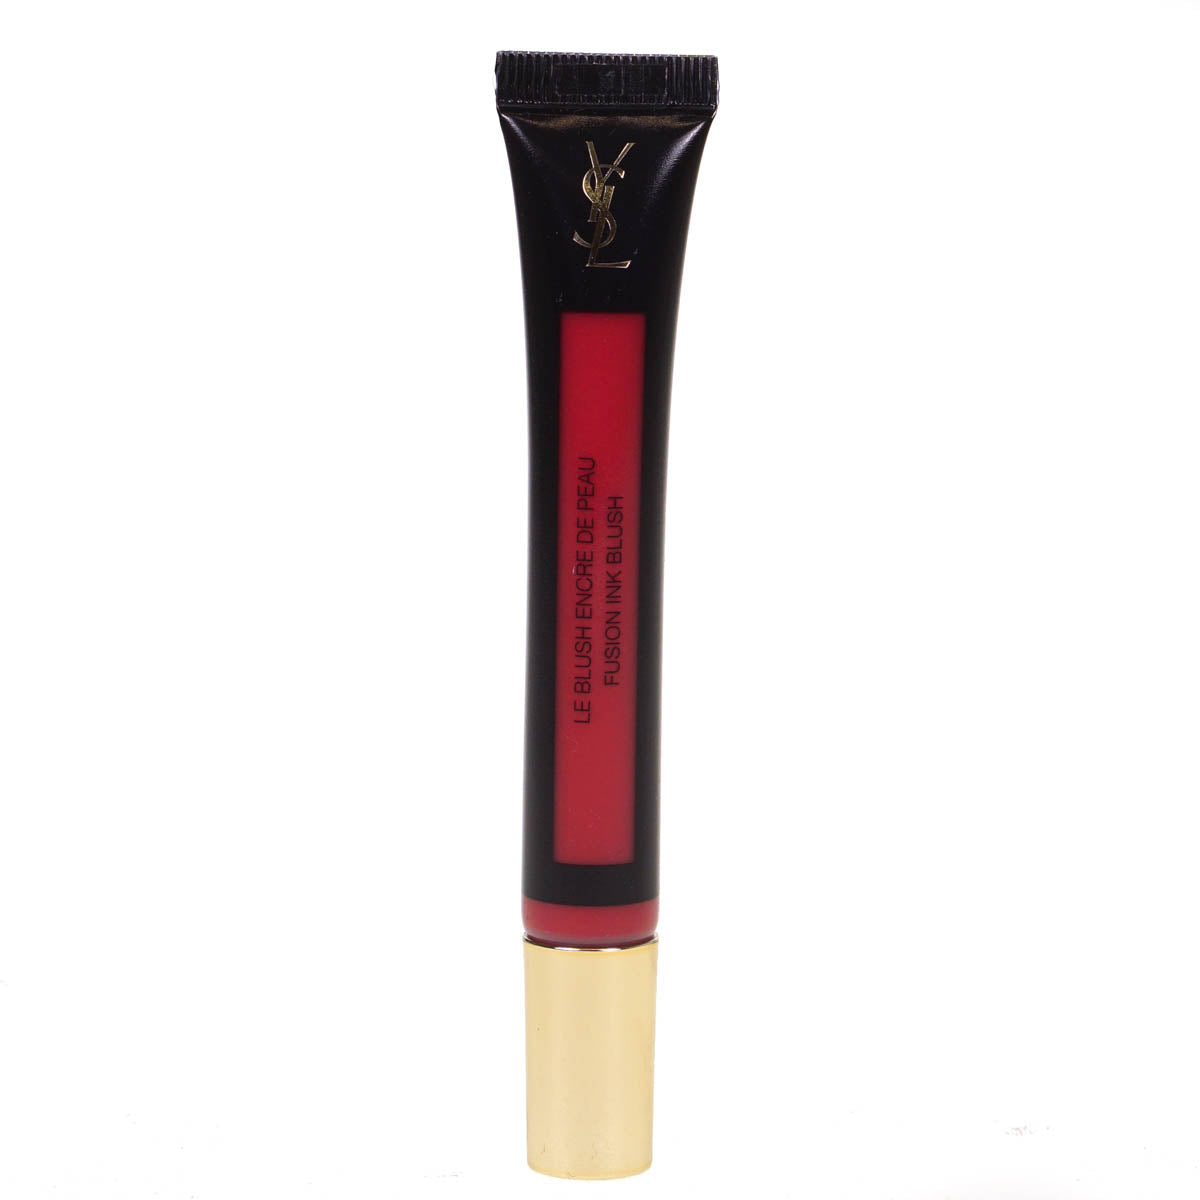 YSL Le Blush Fusion Ink Blush Electric Red No 1